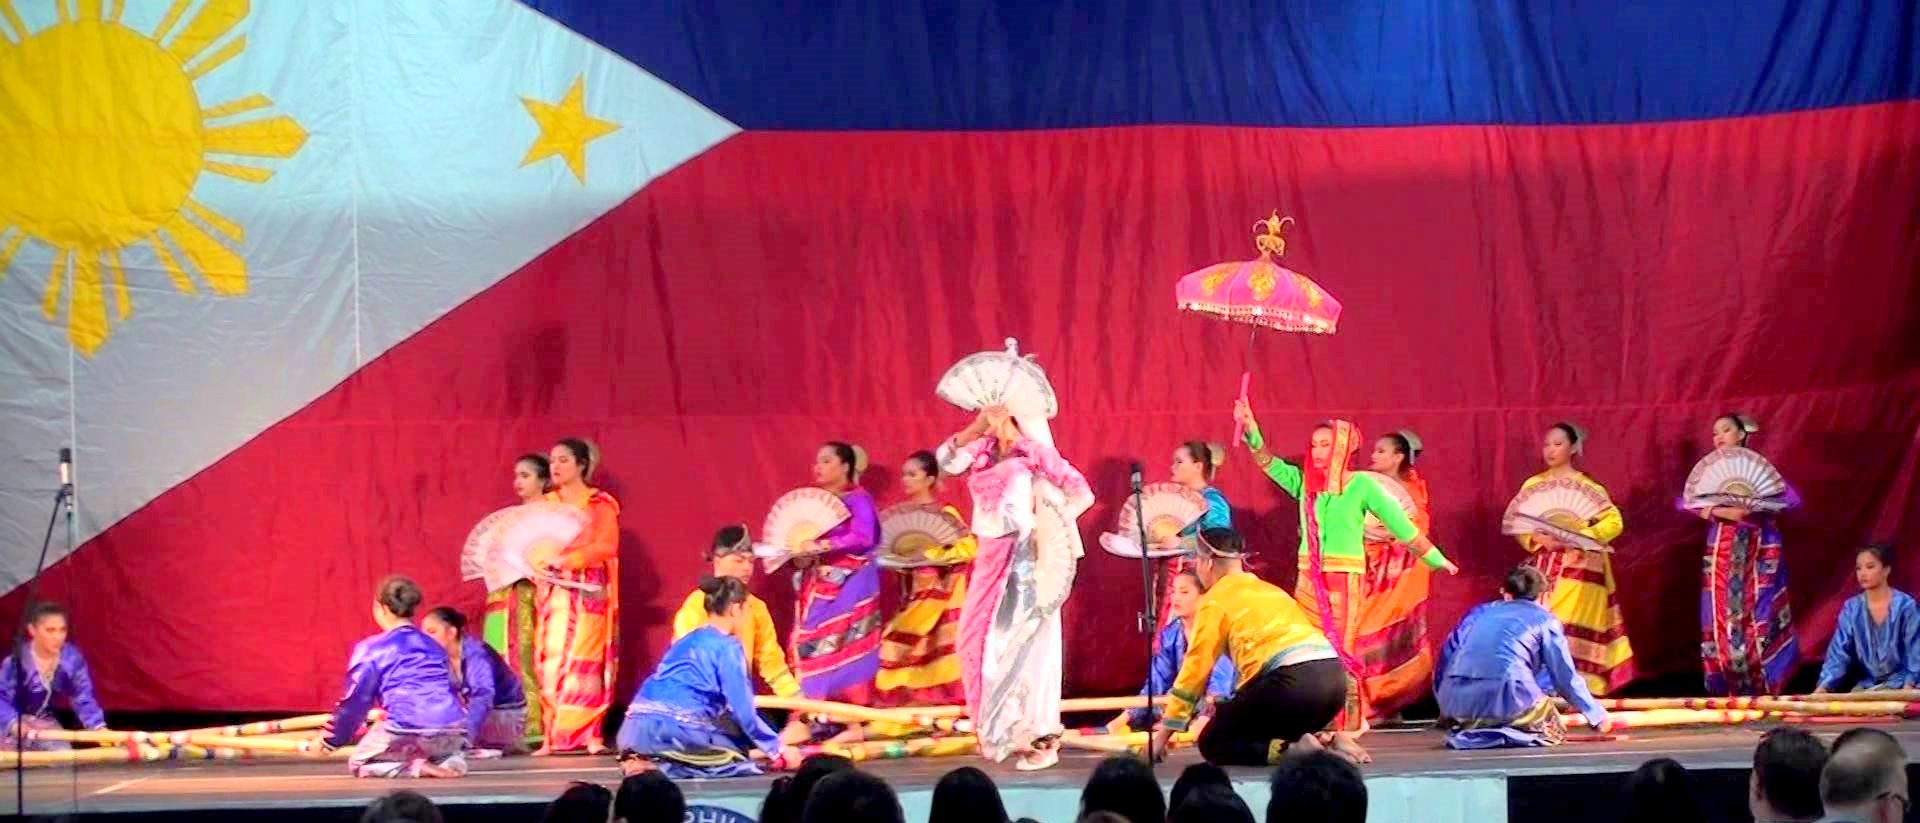 Philippine Folk Dance at Carassauga 2015 YouTube video by Leon Balaban Google image from https://www.youtube.com/watch?v=3f7ELmrV5L0